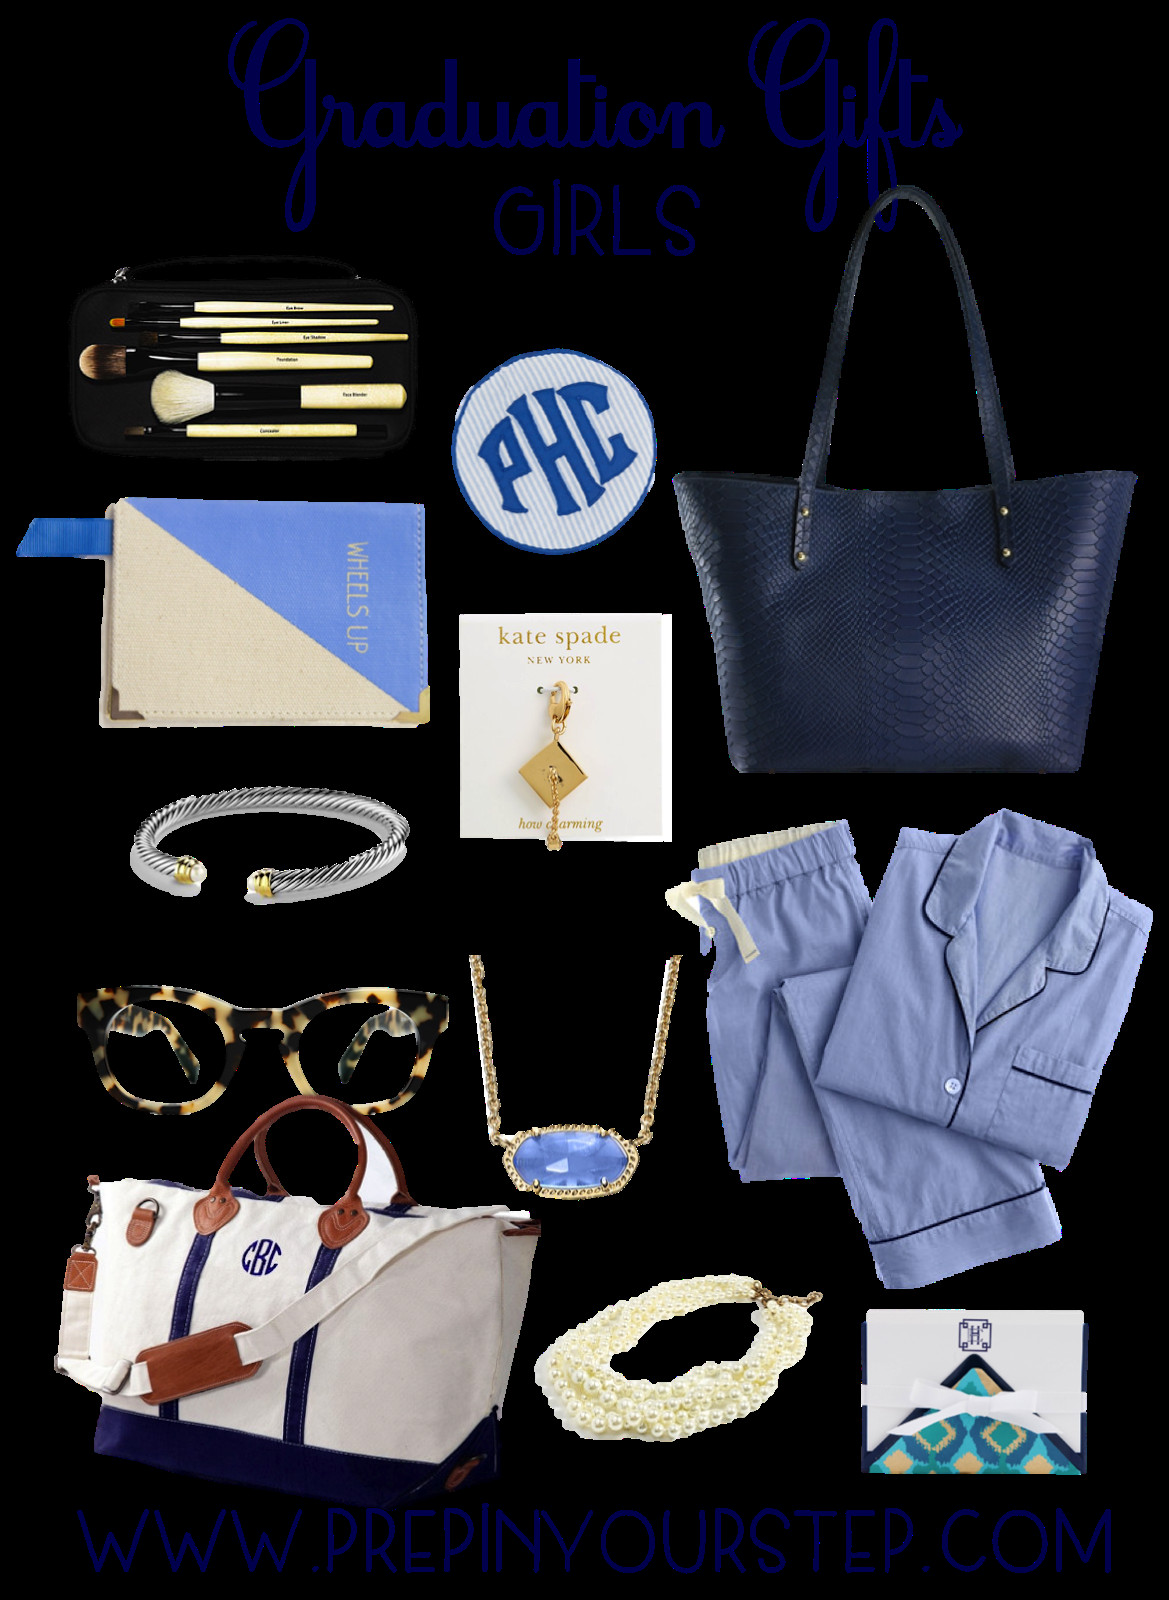 Gift Ideas For College Girls
 Prep In Your Step Graduation Gift Ideas Guys & Girls